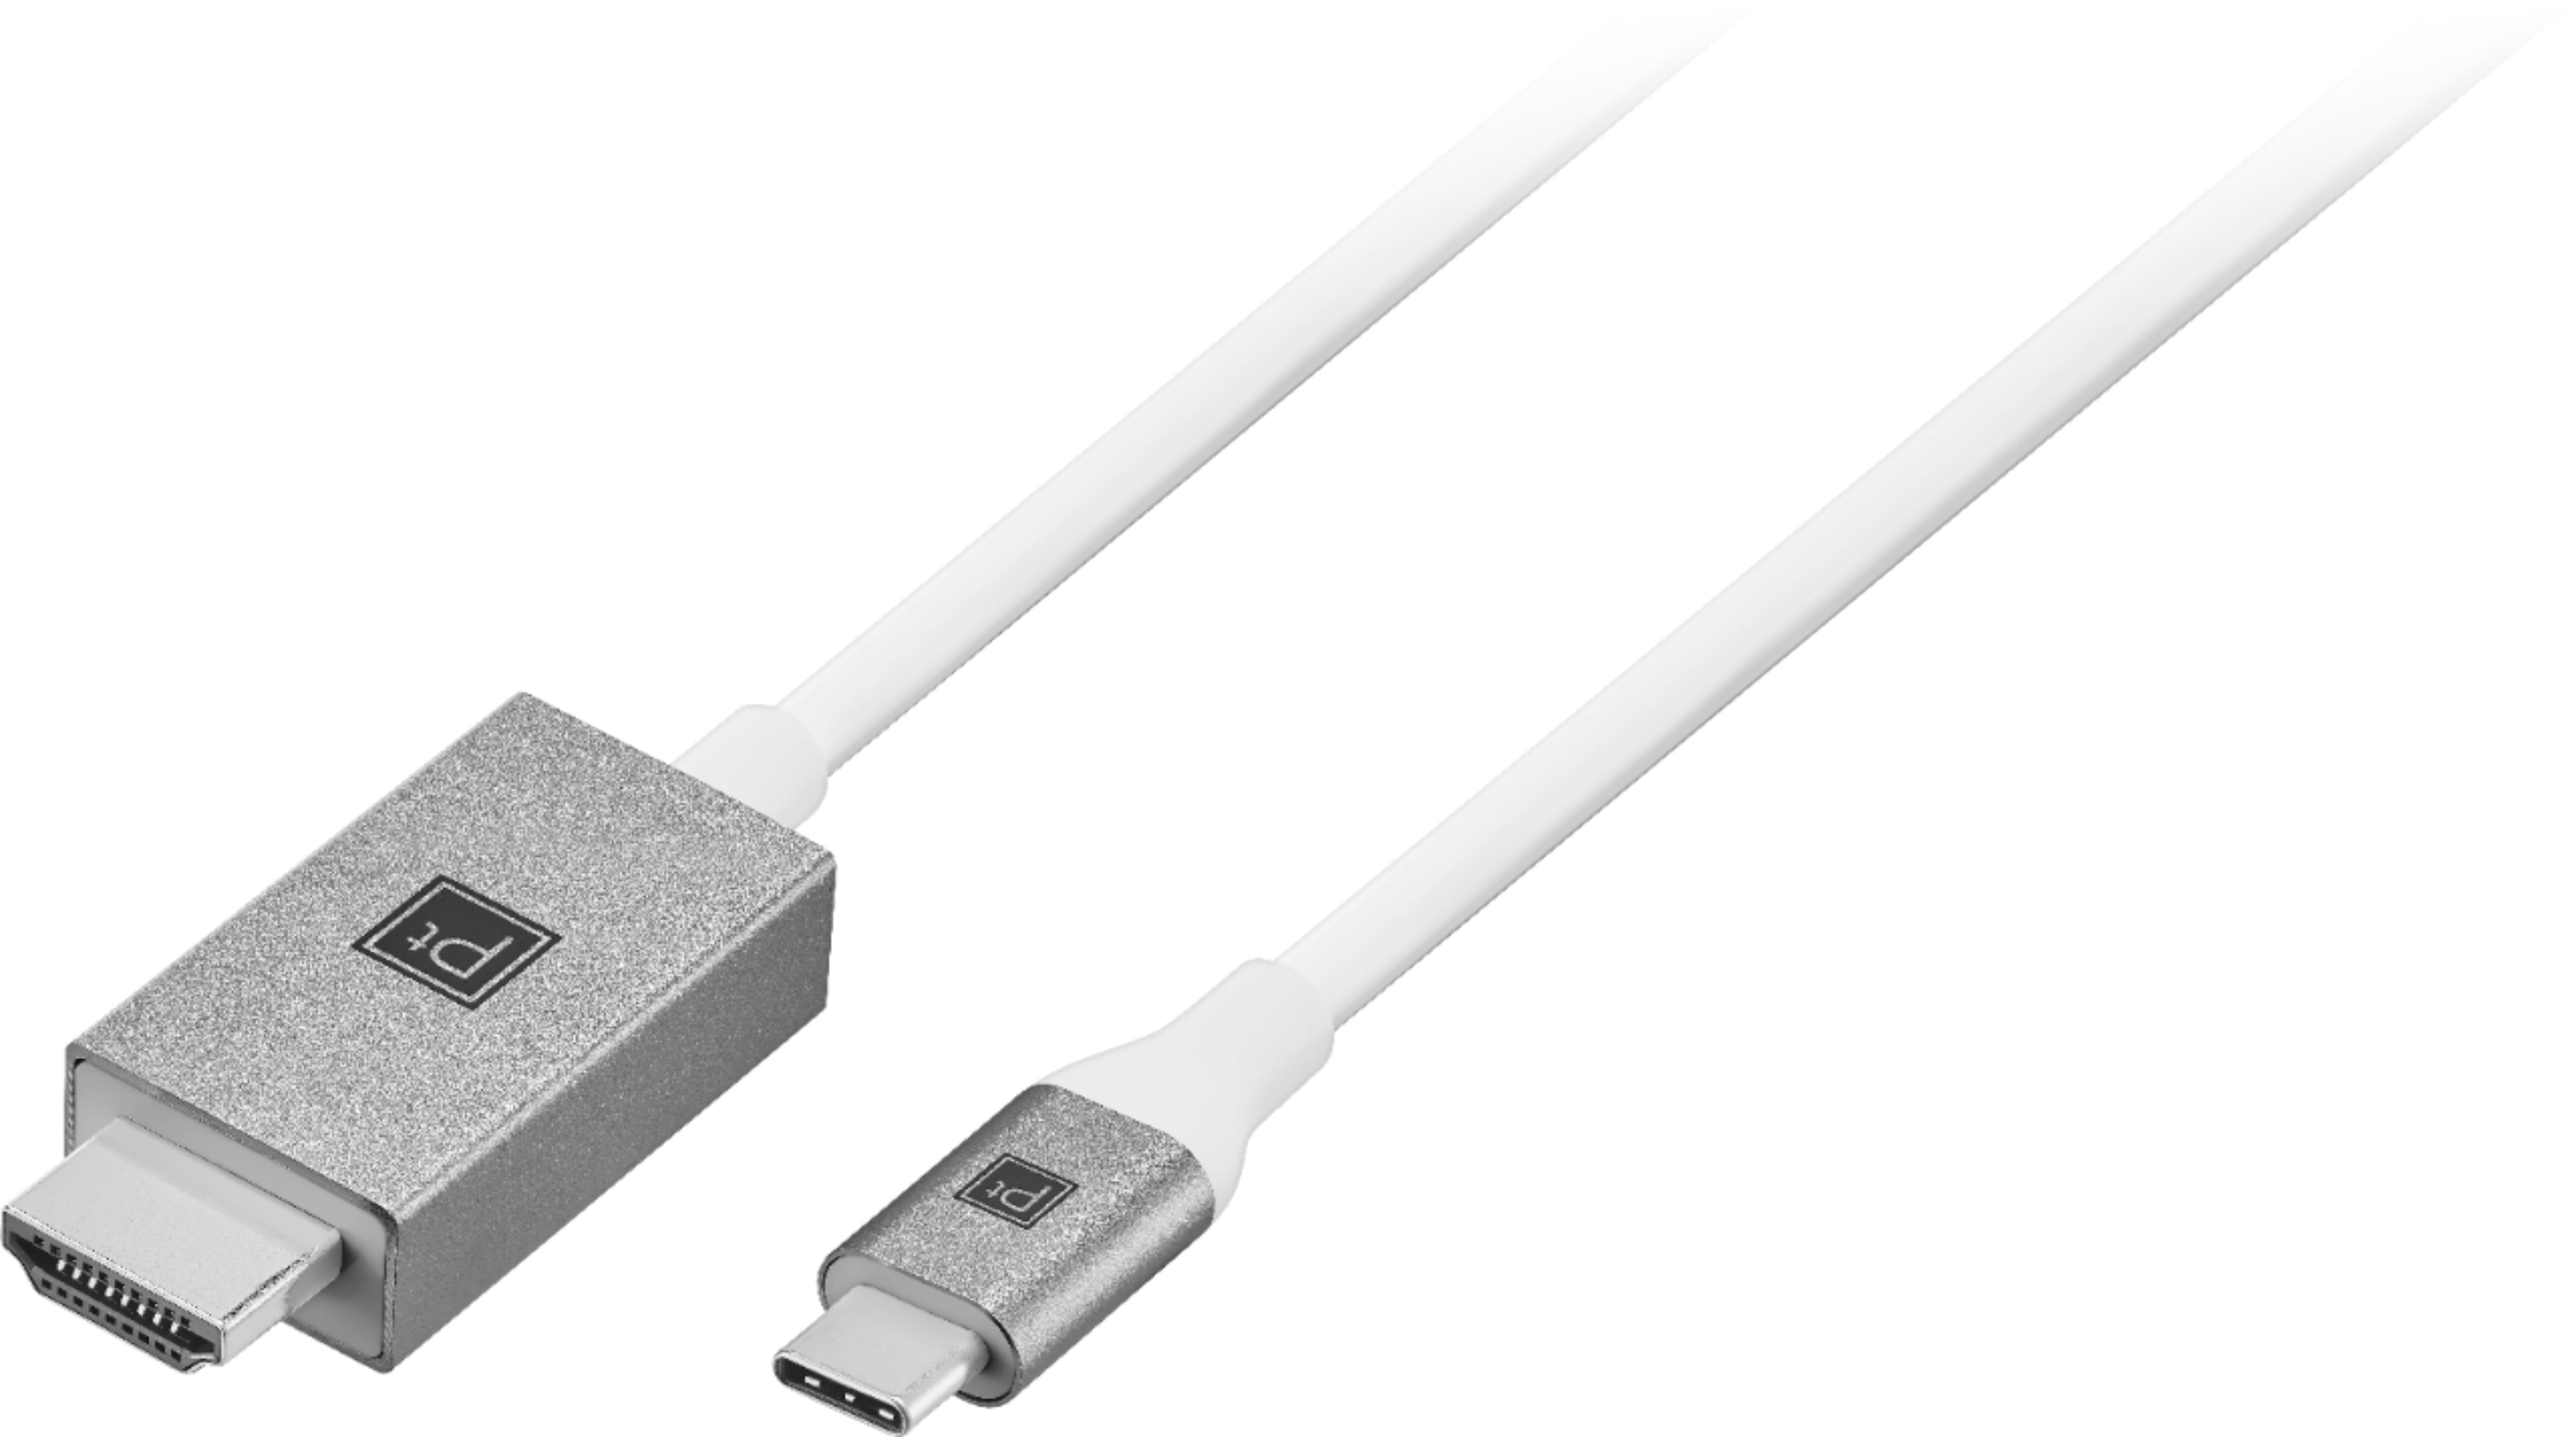 minstens Kantine Megalopolis Platinum™ 6' USB-C to 4K HDMI Cable for MacBook, Chromebook or Laptops with  a USB-C Port Gray PT-PCCXHDMI6 - Best Buy